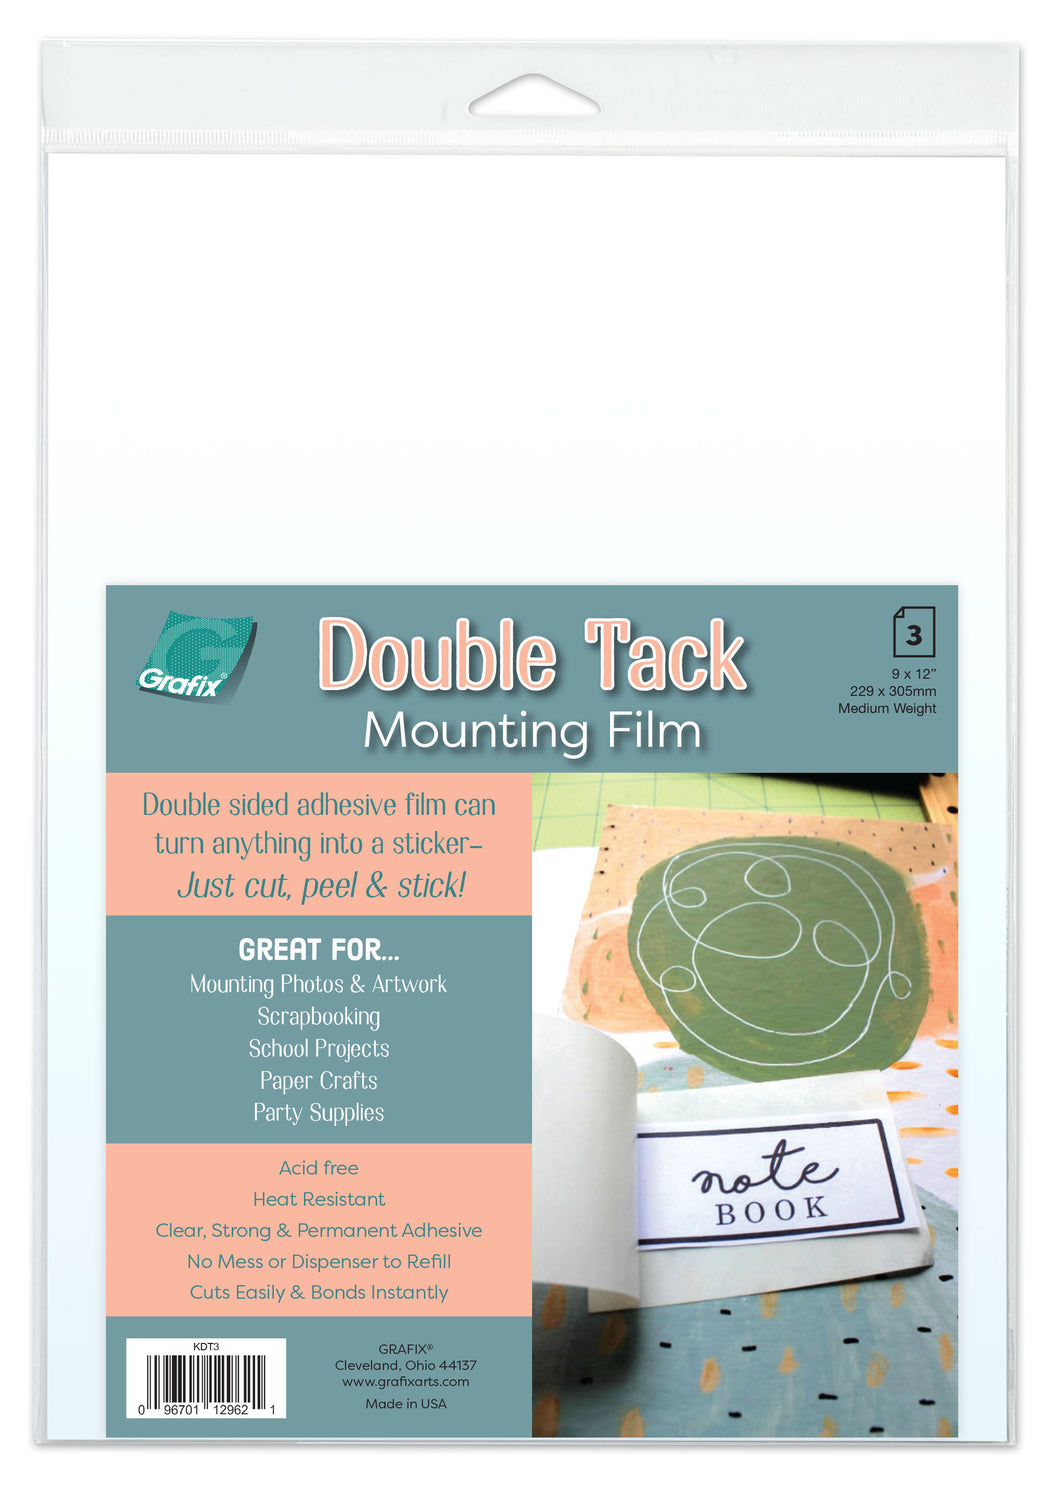 Archival Double Tack Mounting Film